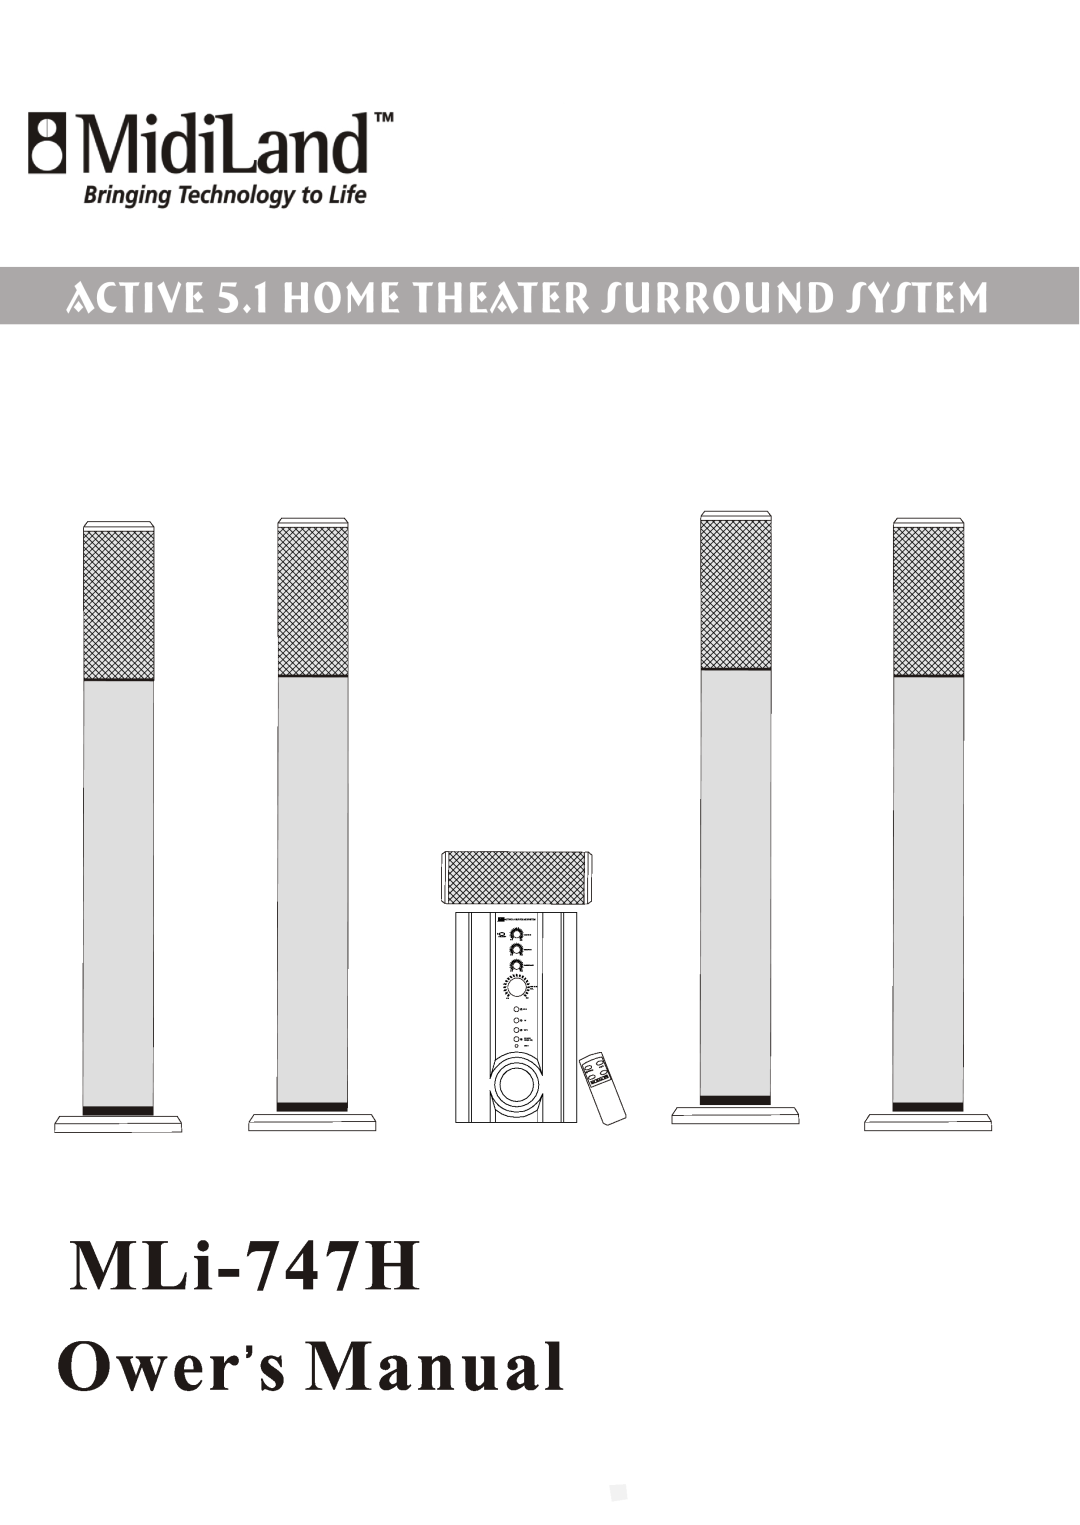 MidiLand manual MLi-747HOwer,s Manual, ACTIVE 5.1 HOME THEATER SURROUND SYSTEM, ACTIVE 5.1 SURROUND SYSTEM 